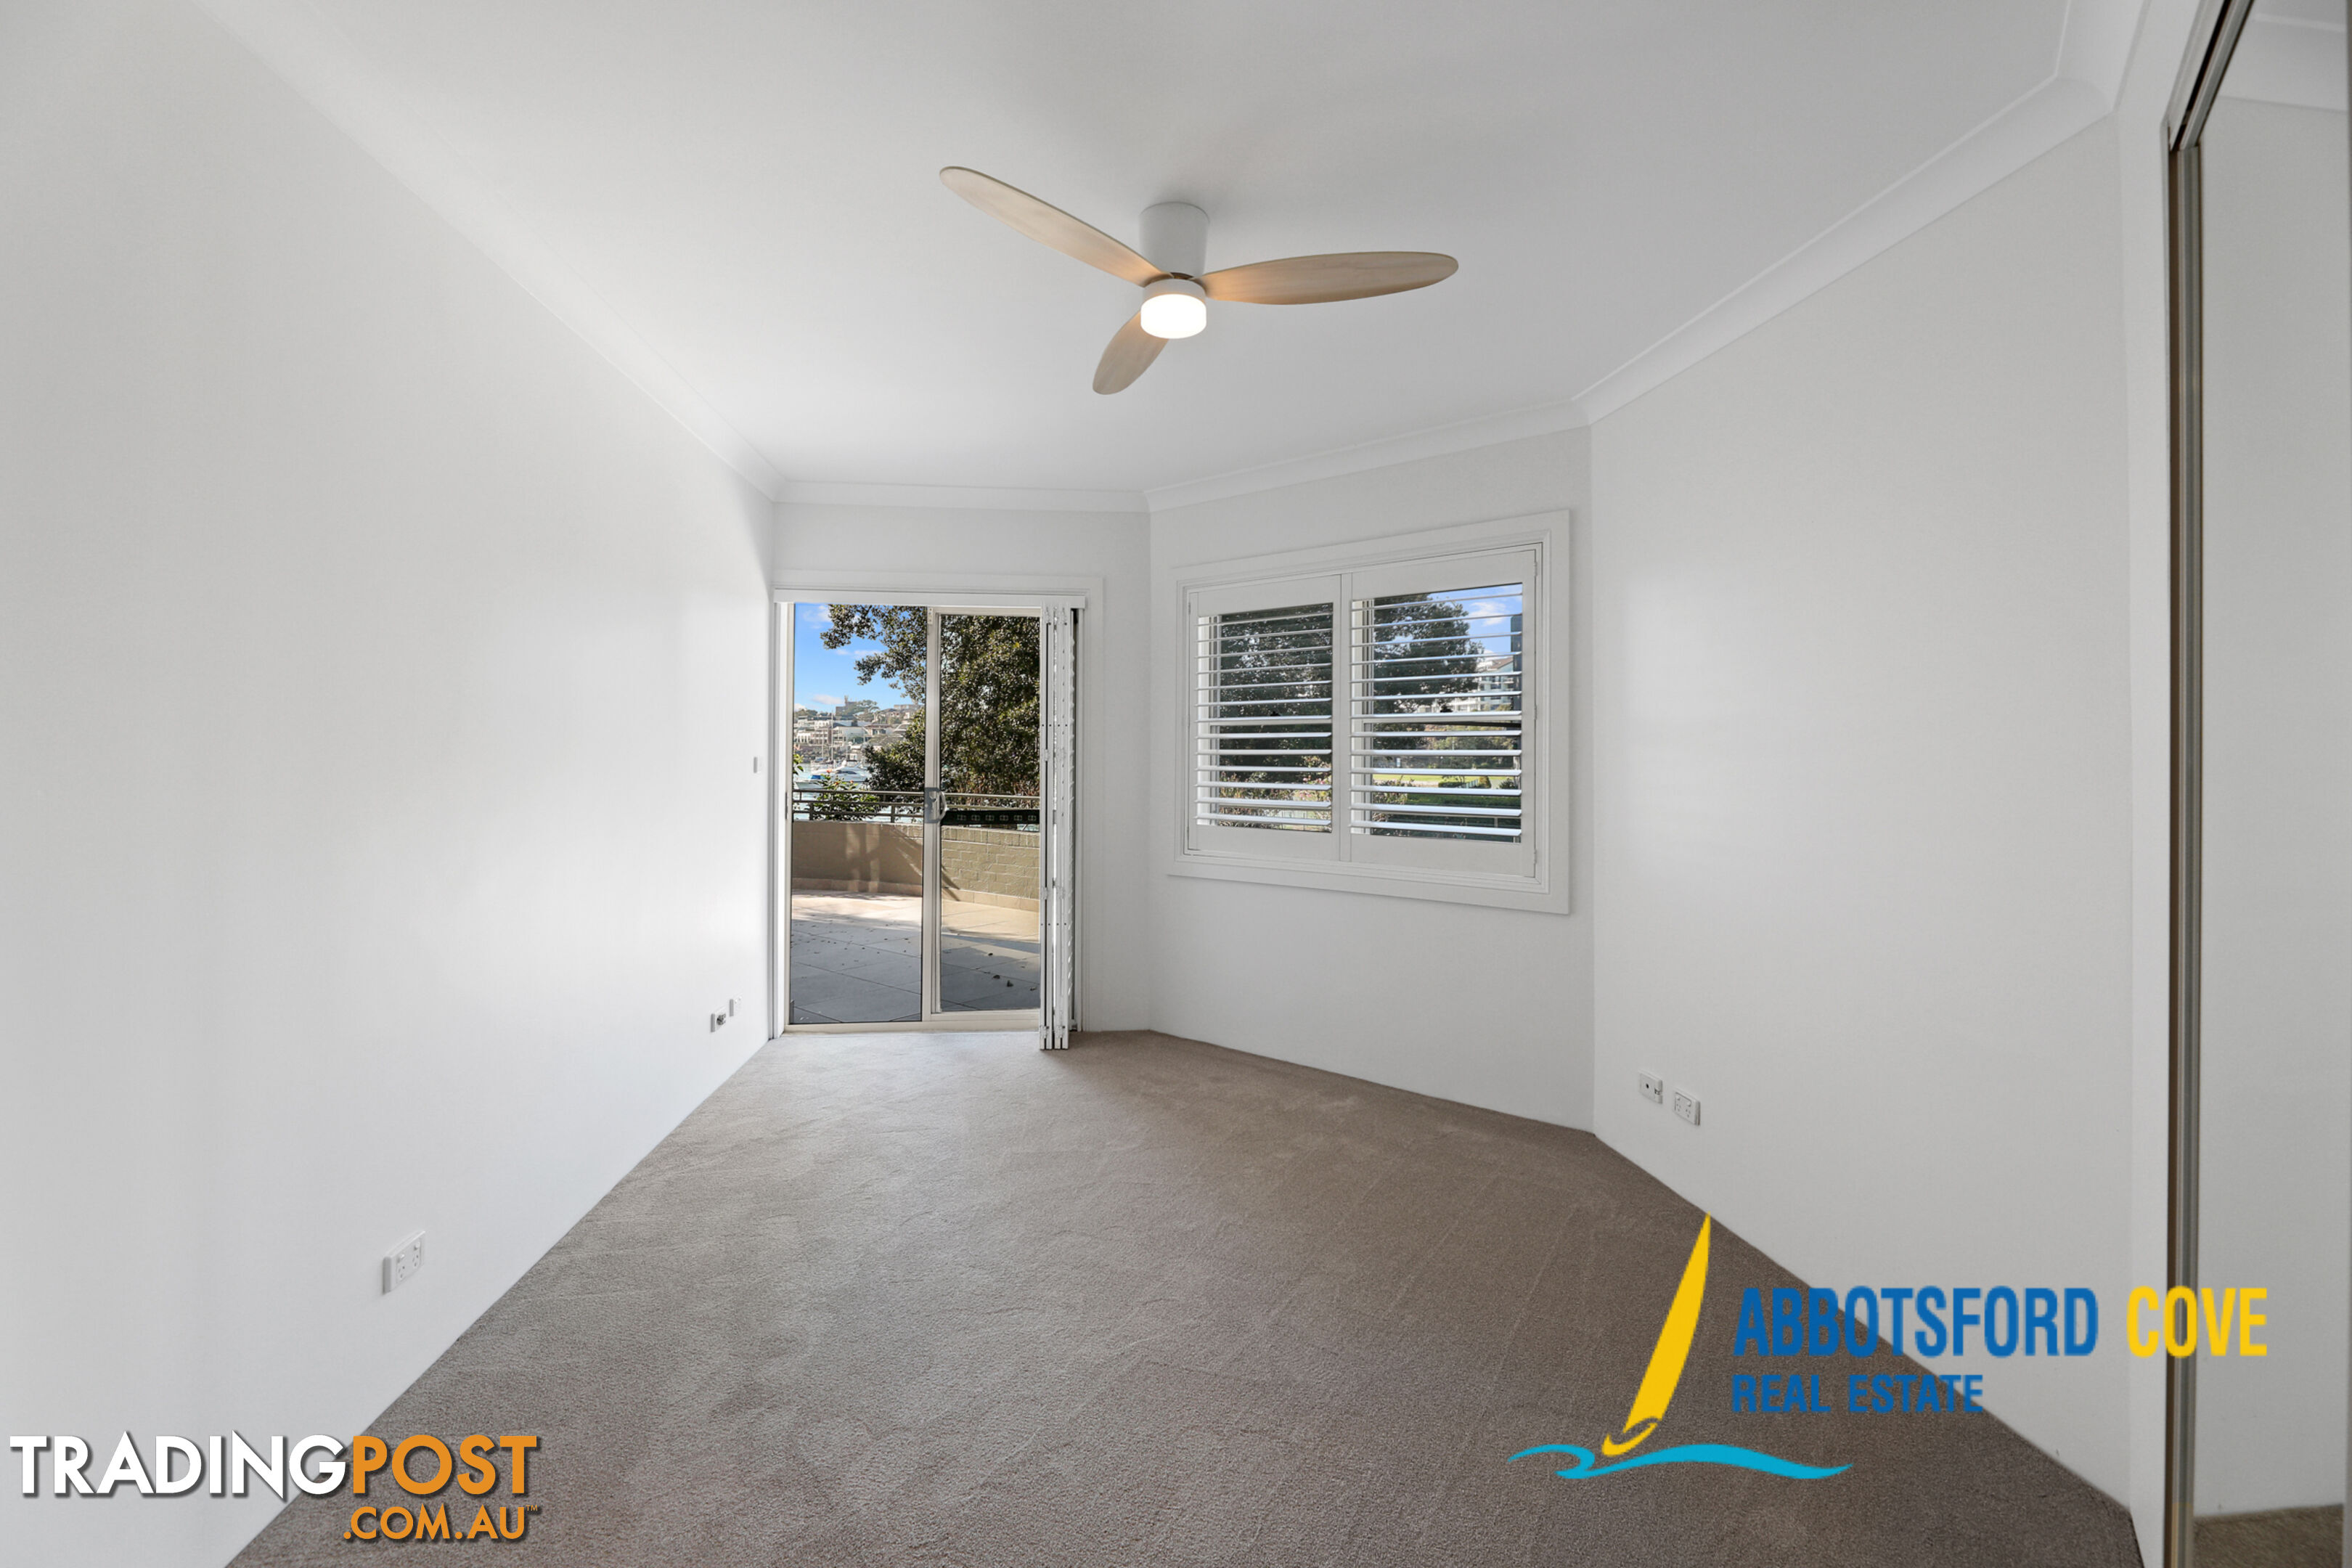 32 7 Figtree Avenue ABBOTSFORD NSW 2046